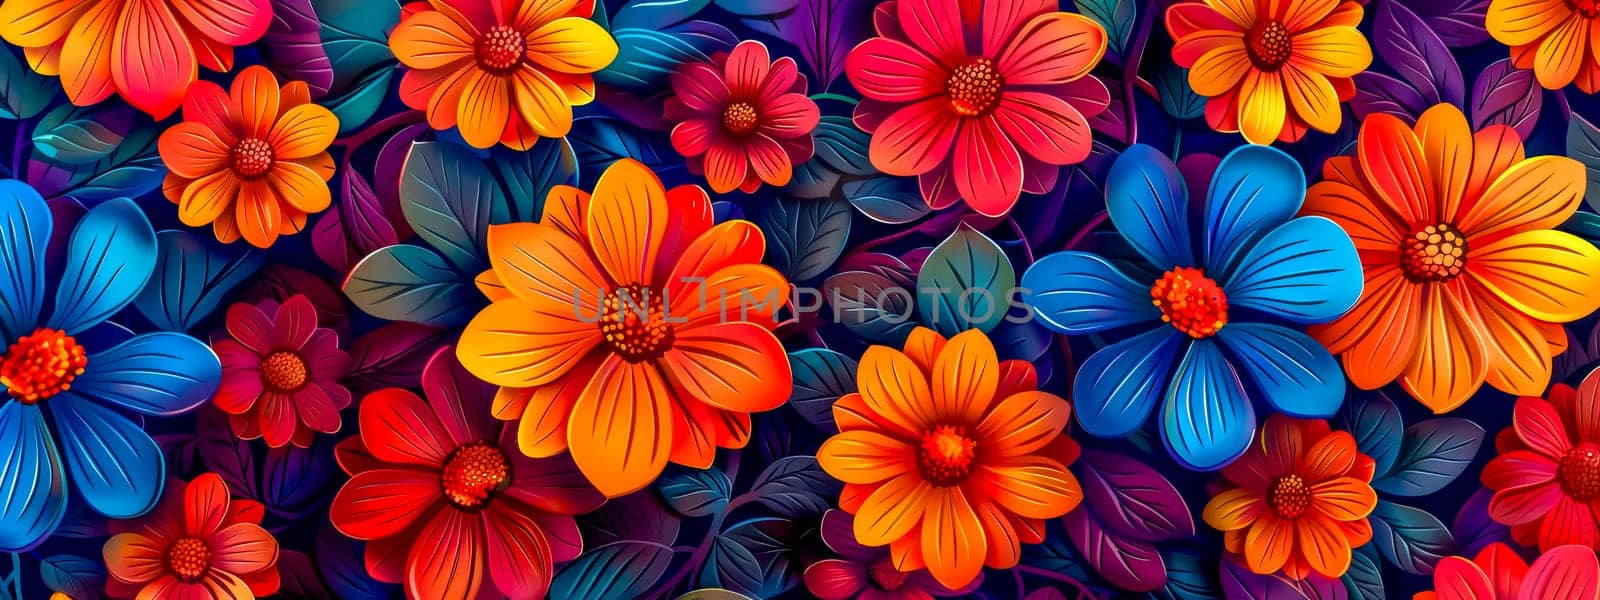 Vibrant floral background with colorful blooms by Edophoto